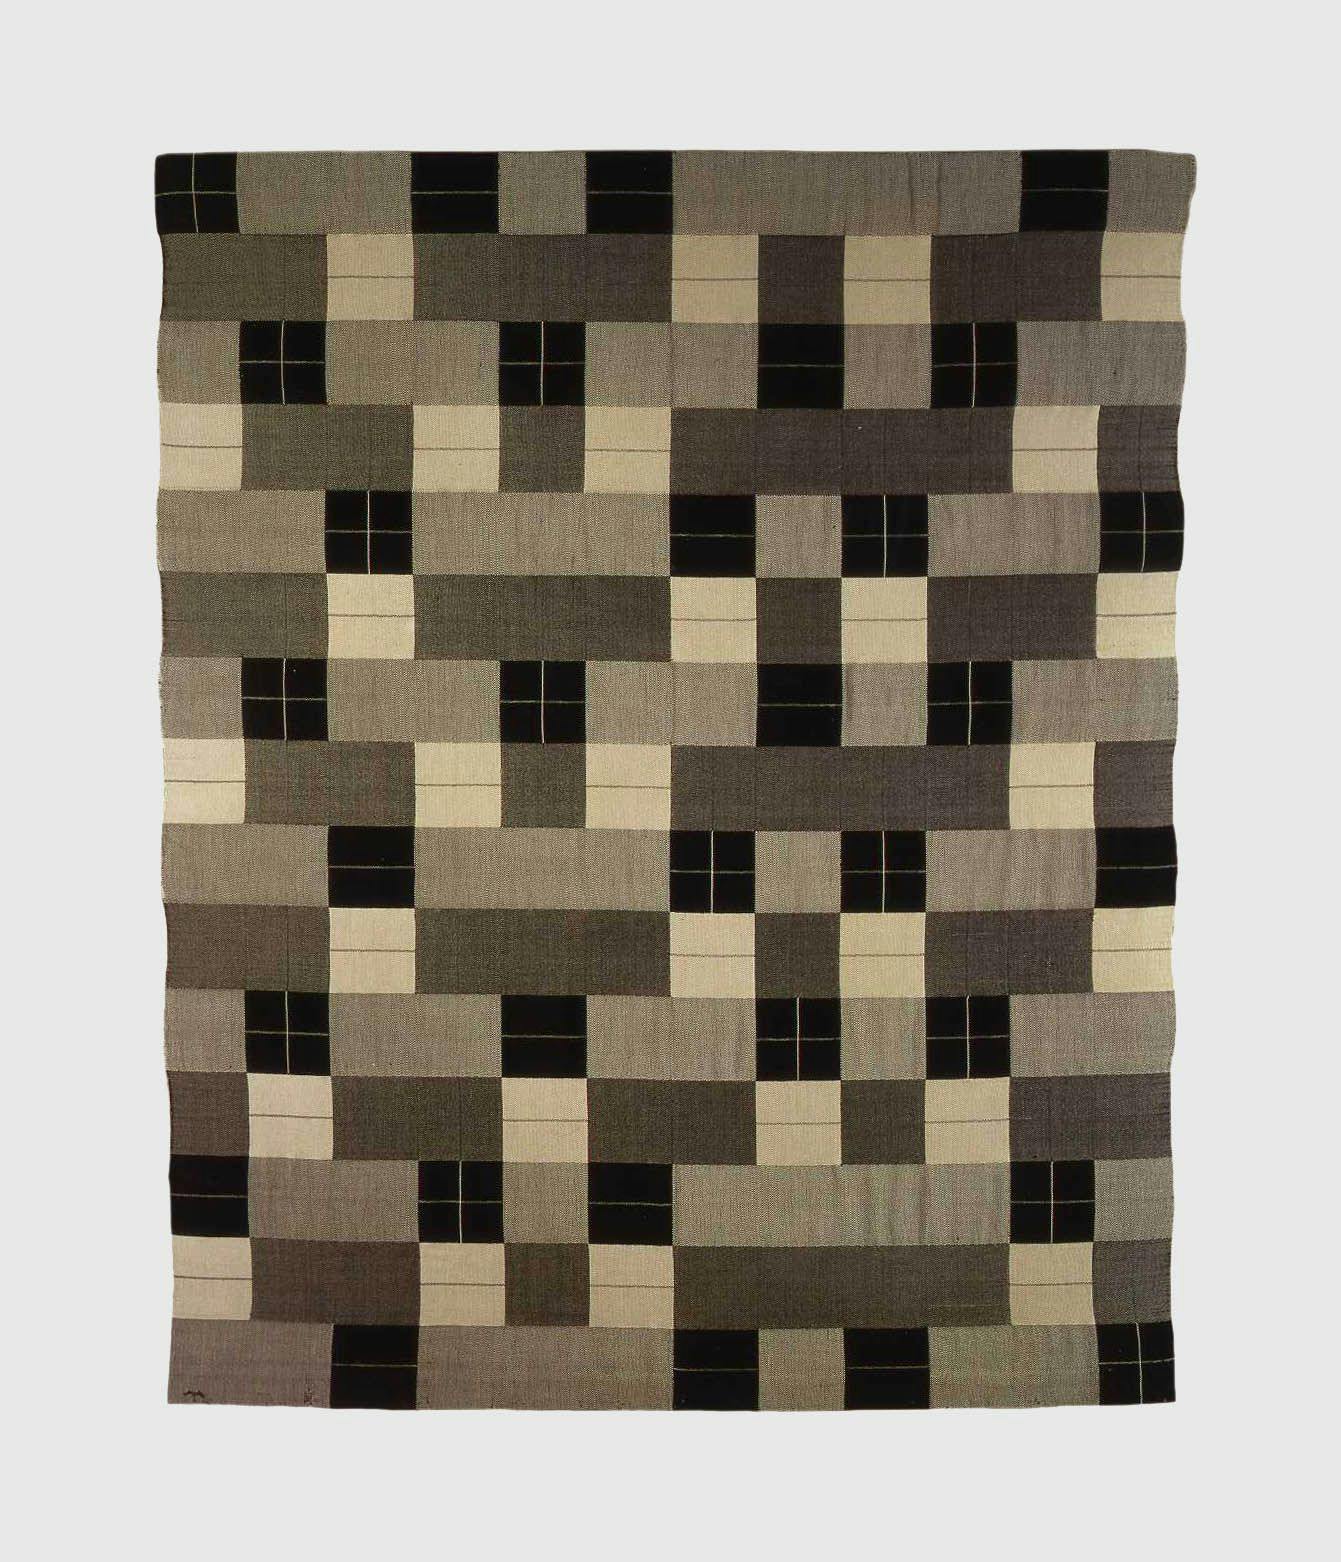 A textile by Anni Albers, titled Black White Gray, dated in 1927 and 1964.